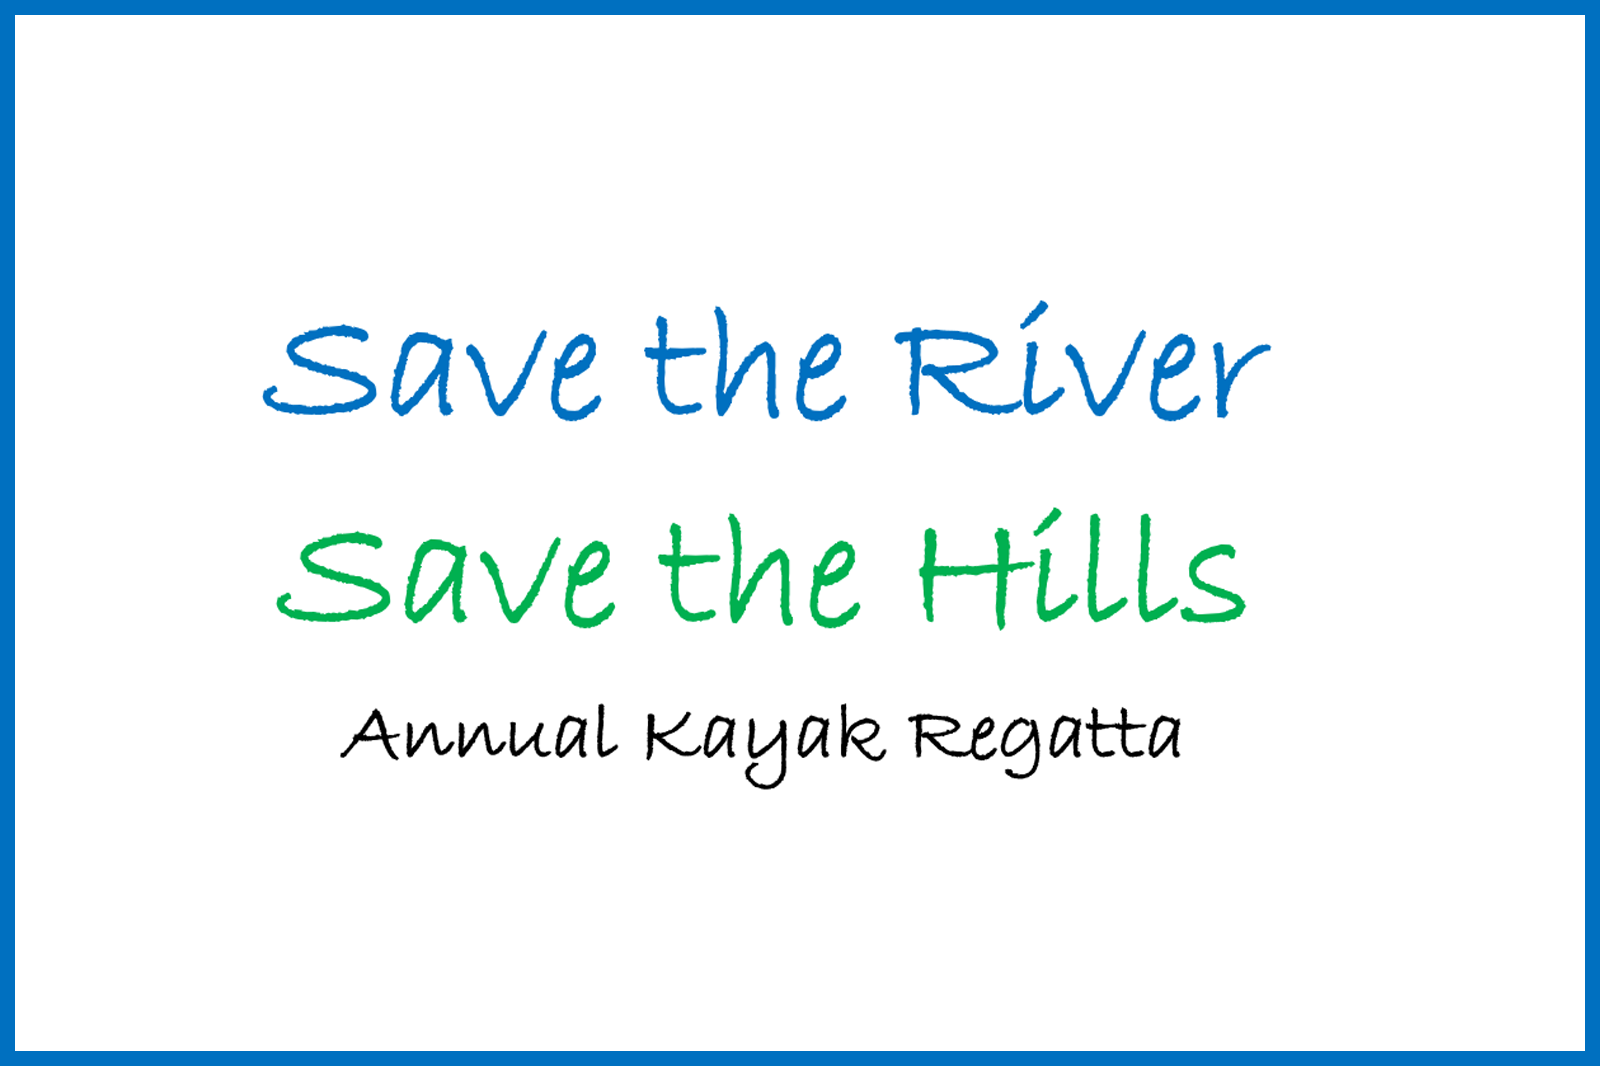 save the river save the hills